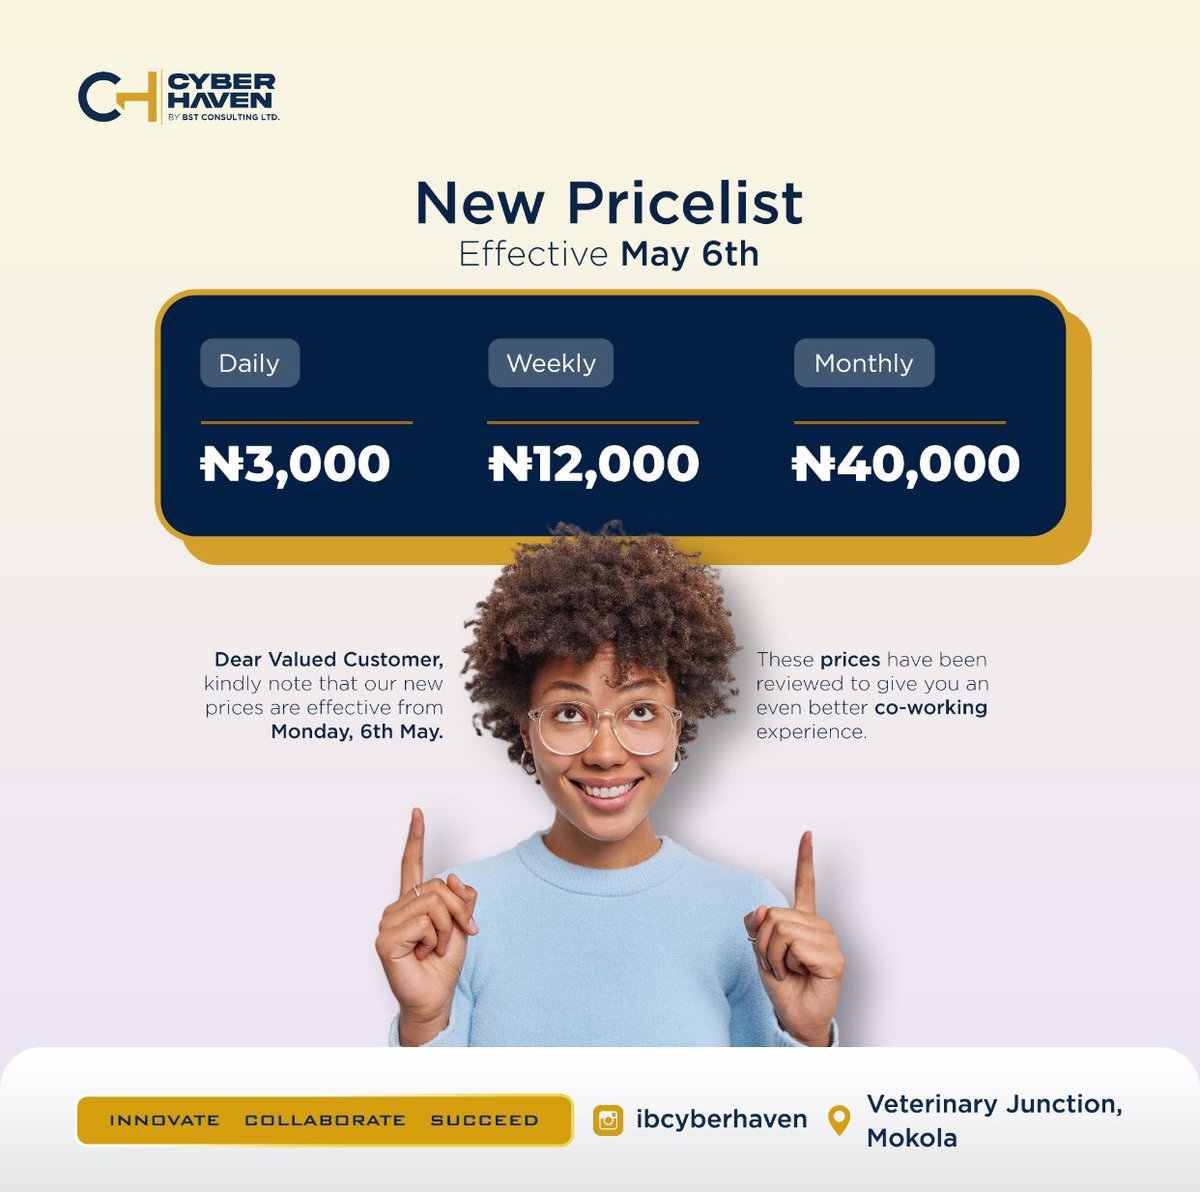 Dear valued customer, kindly note that we have reviewed our prices and they are are effective from Monday, 6th May,
 
We look forward to serving you better. 

#ibcyberhaven #priceincrease #priceincreasealert #toserveyoubetter #coworkingspace #workingspace #coworkingspaceinibadan